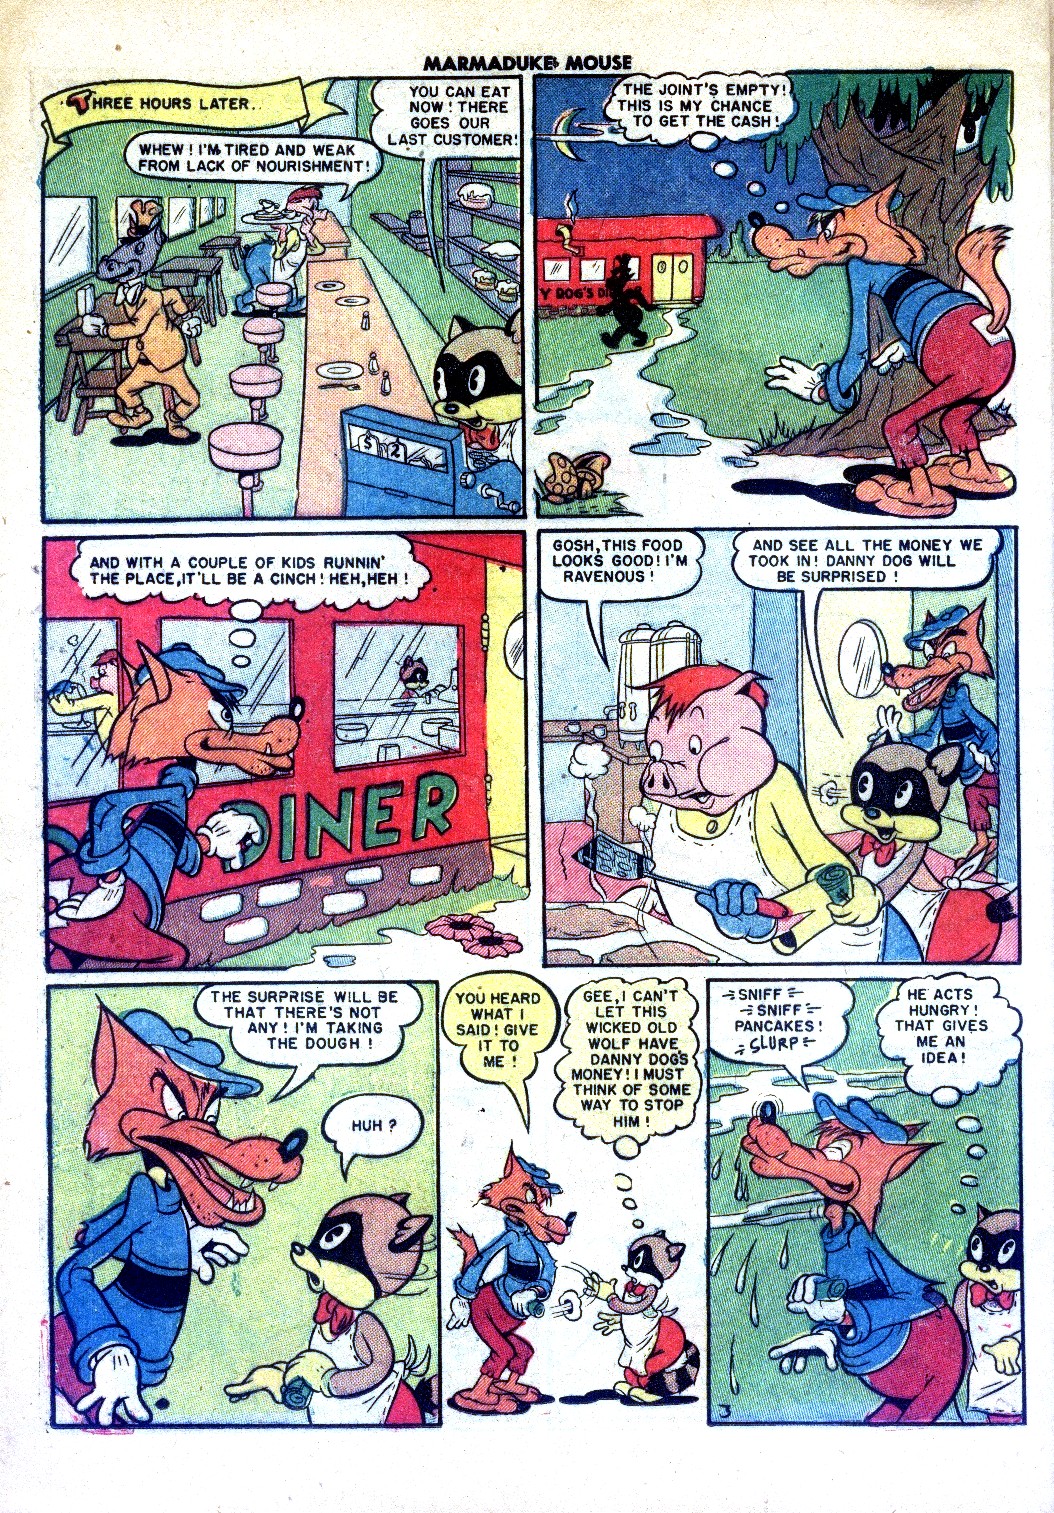 Read online Marmaduke Mouse comic -  Issue #26 - 24